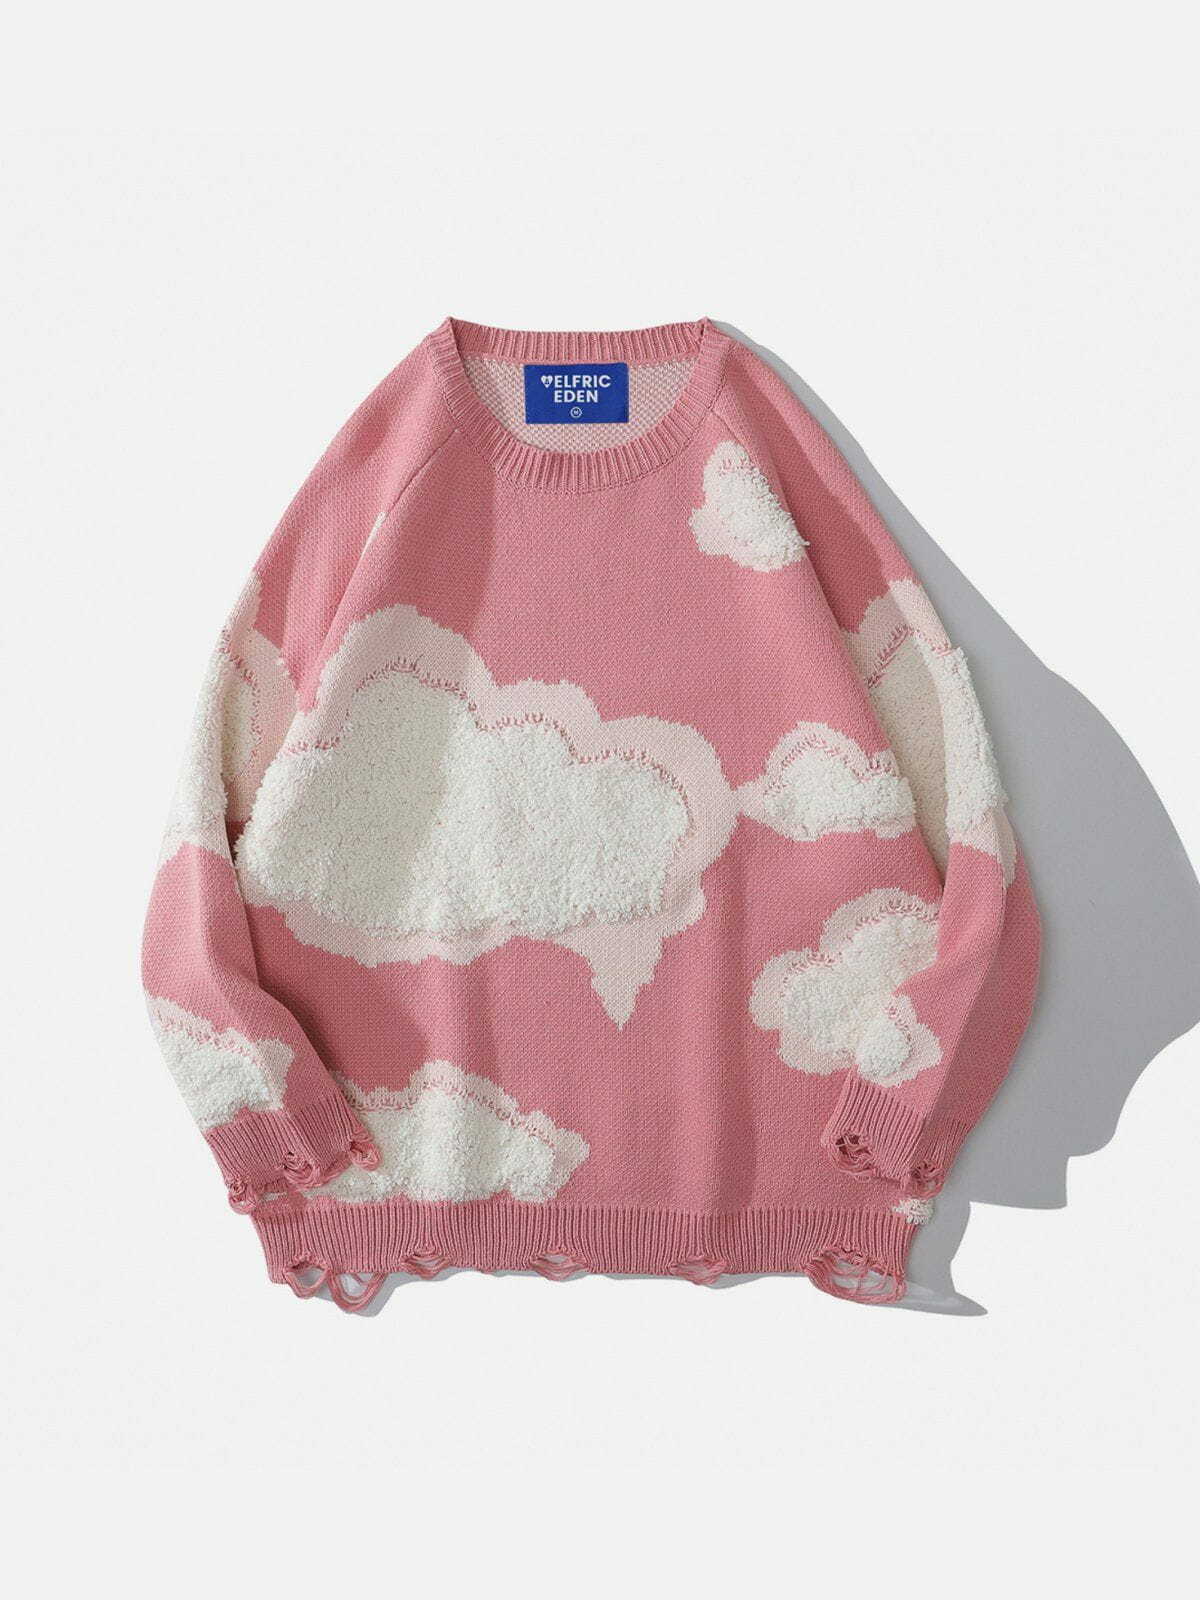 chic flocking cloud sweater   youthful & trendy design 4279